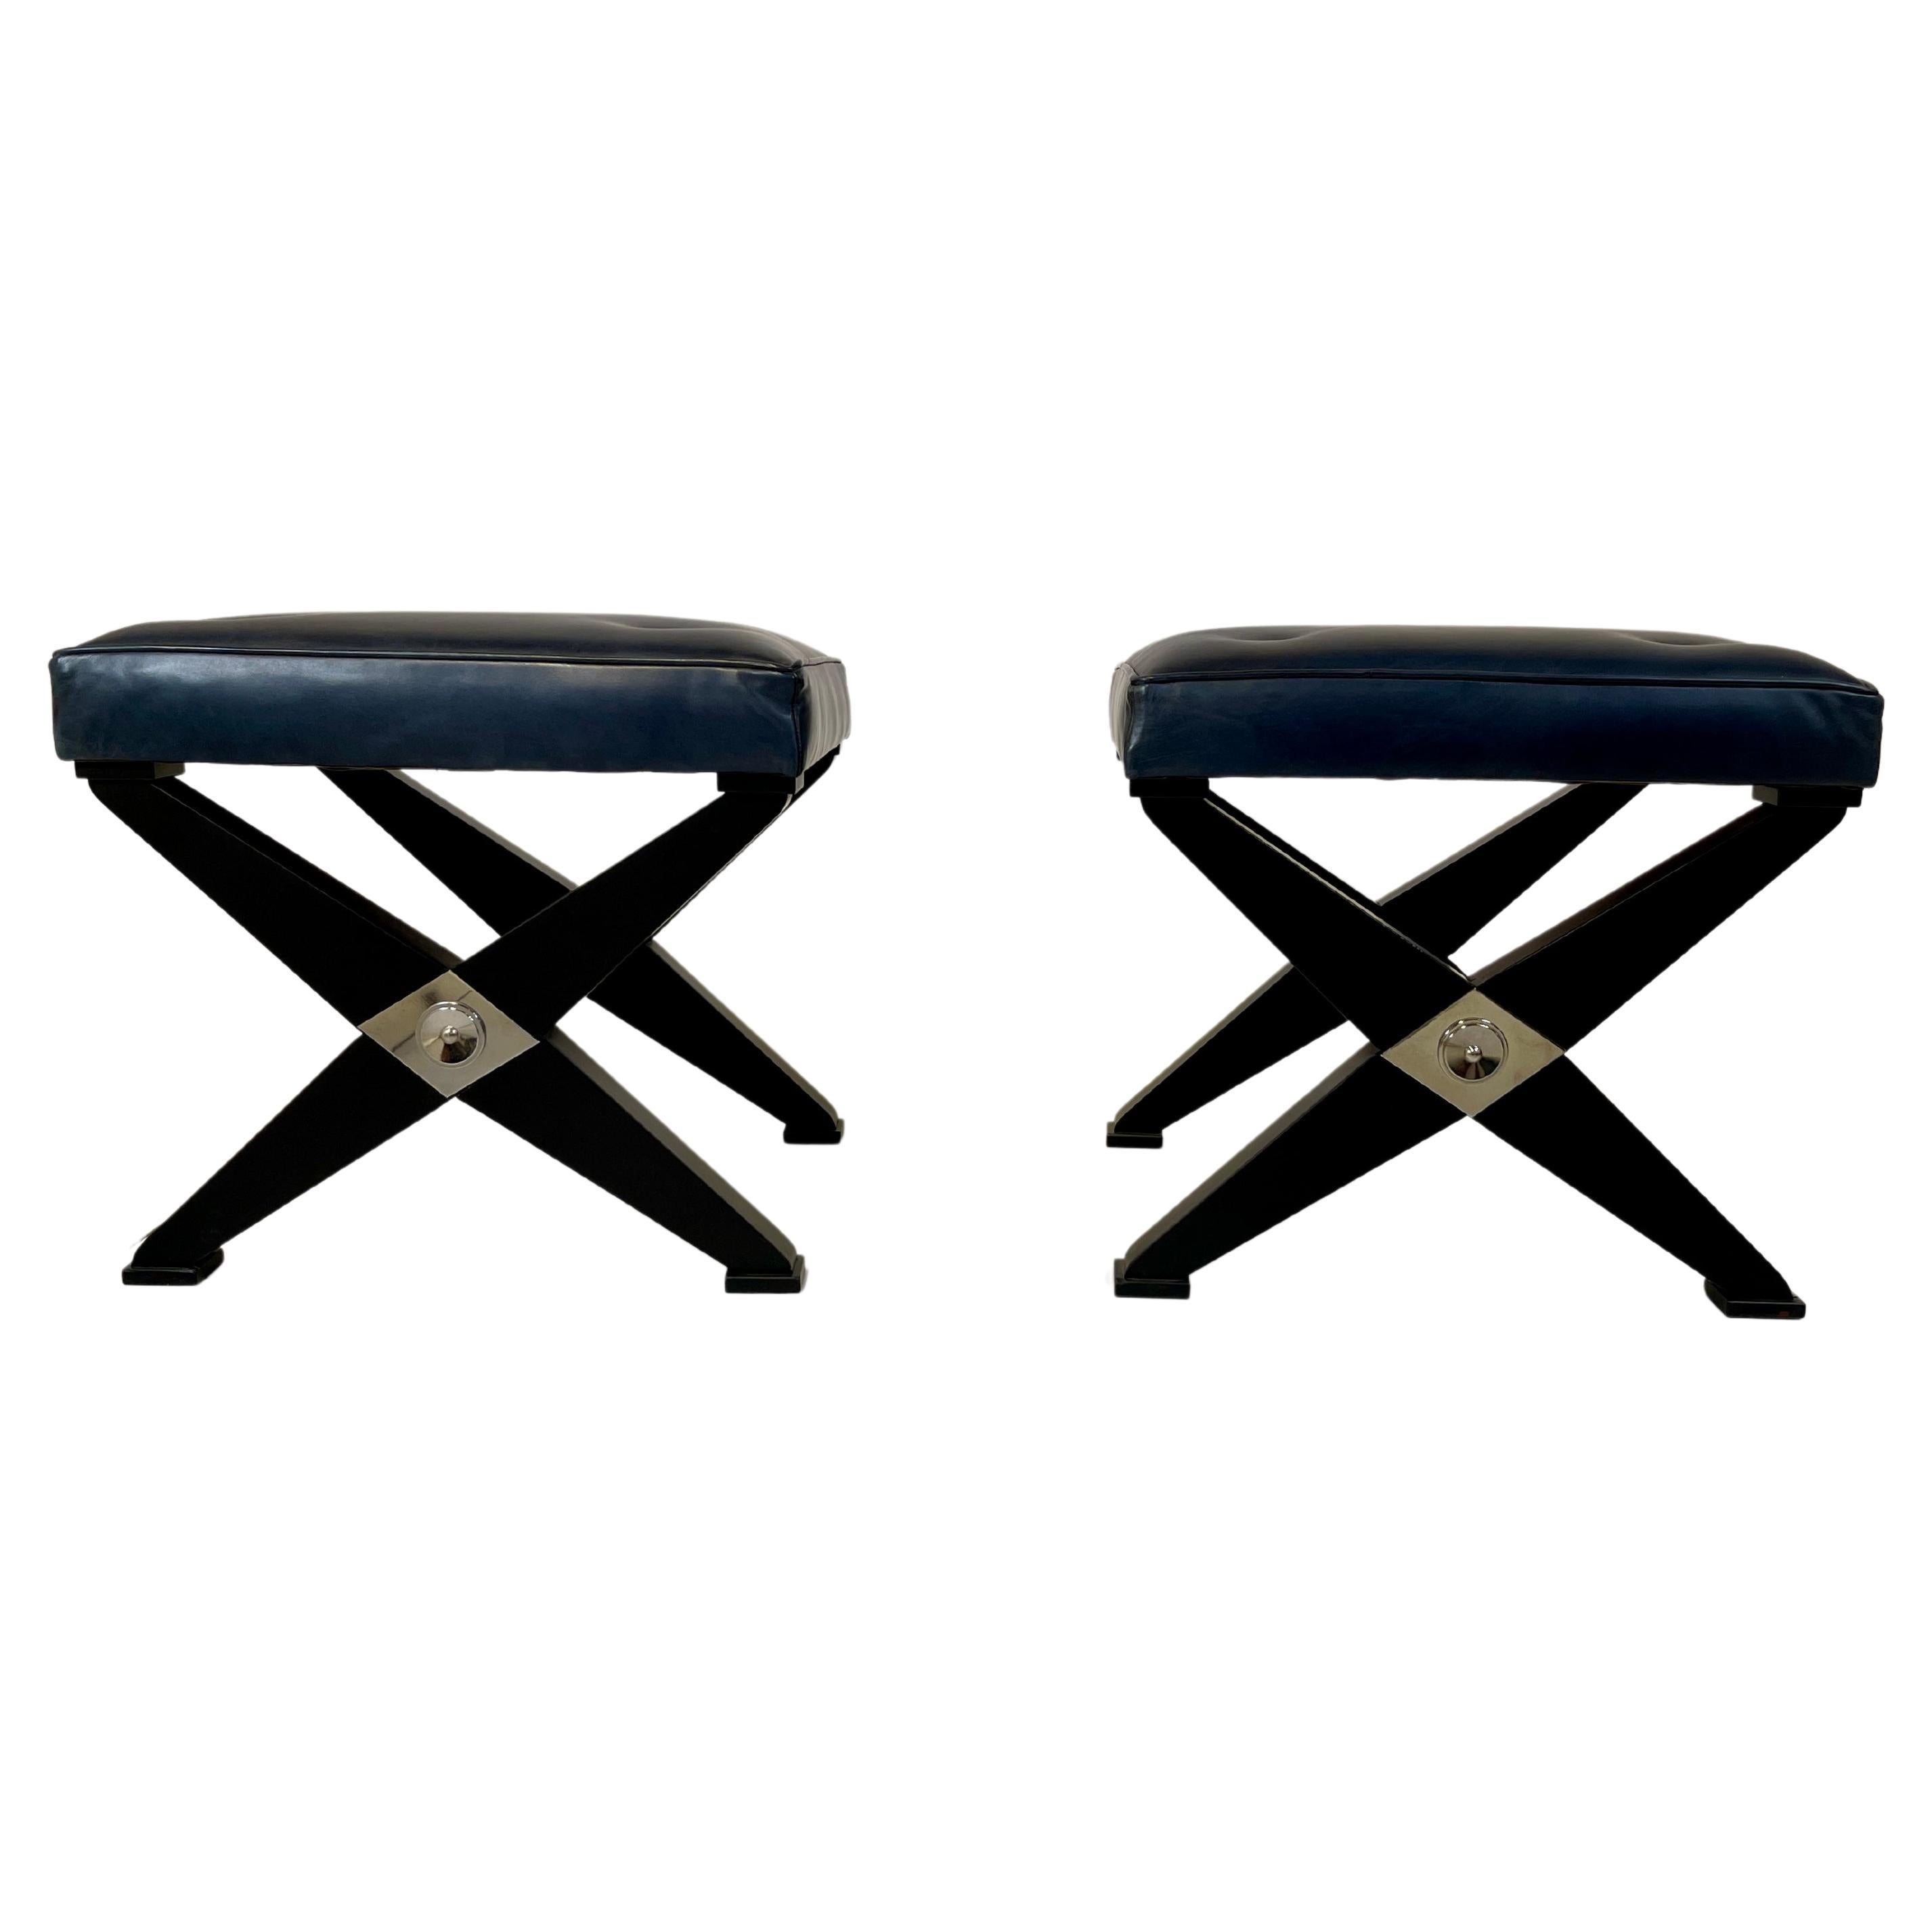 Pair of stools in black lacquered wood and blue leather For Sale